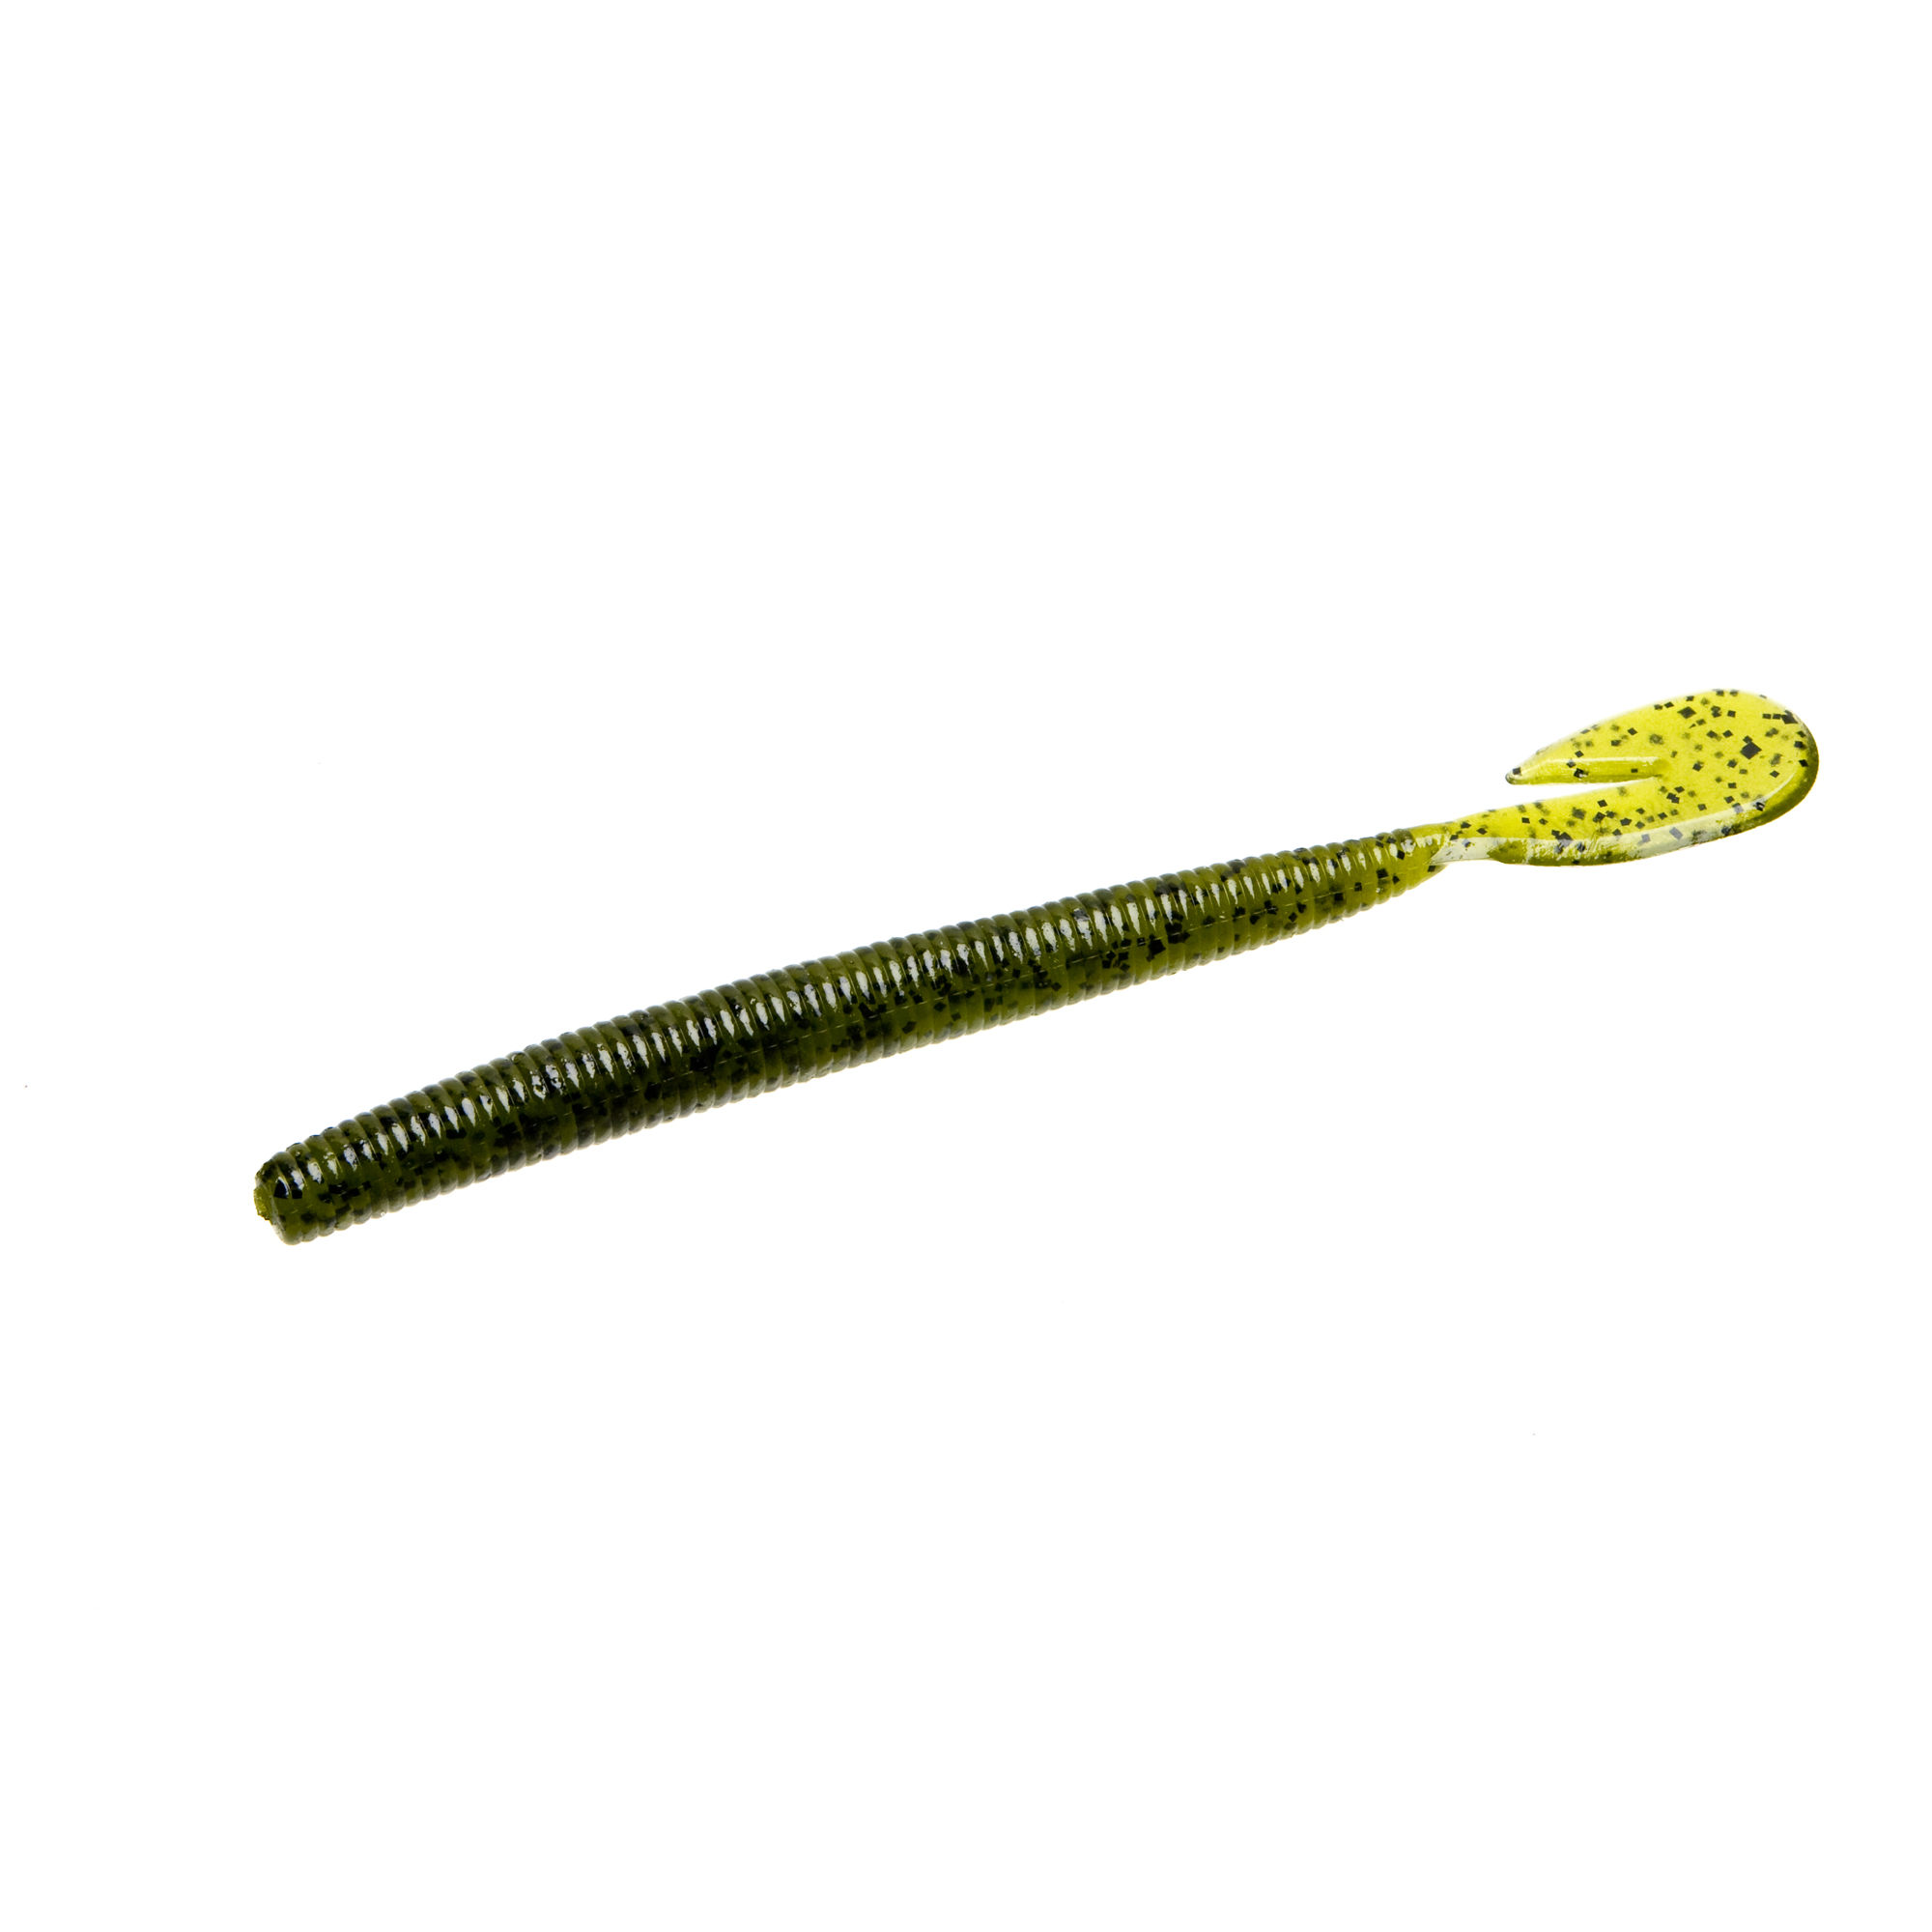 Zoom Bait Magnum Trick Worm Bait, Watermelon Seed, 7-Inch, Pack of